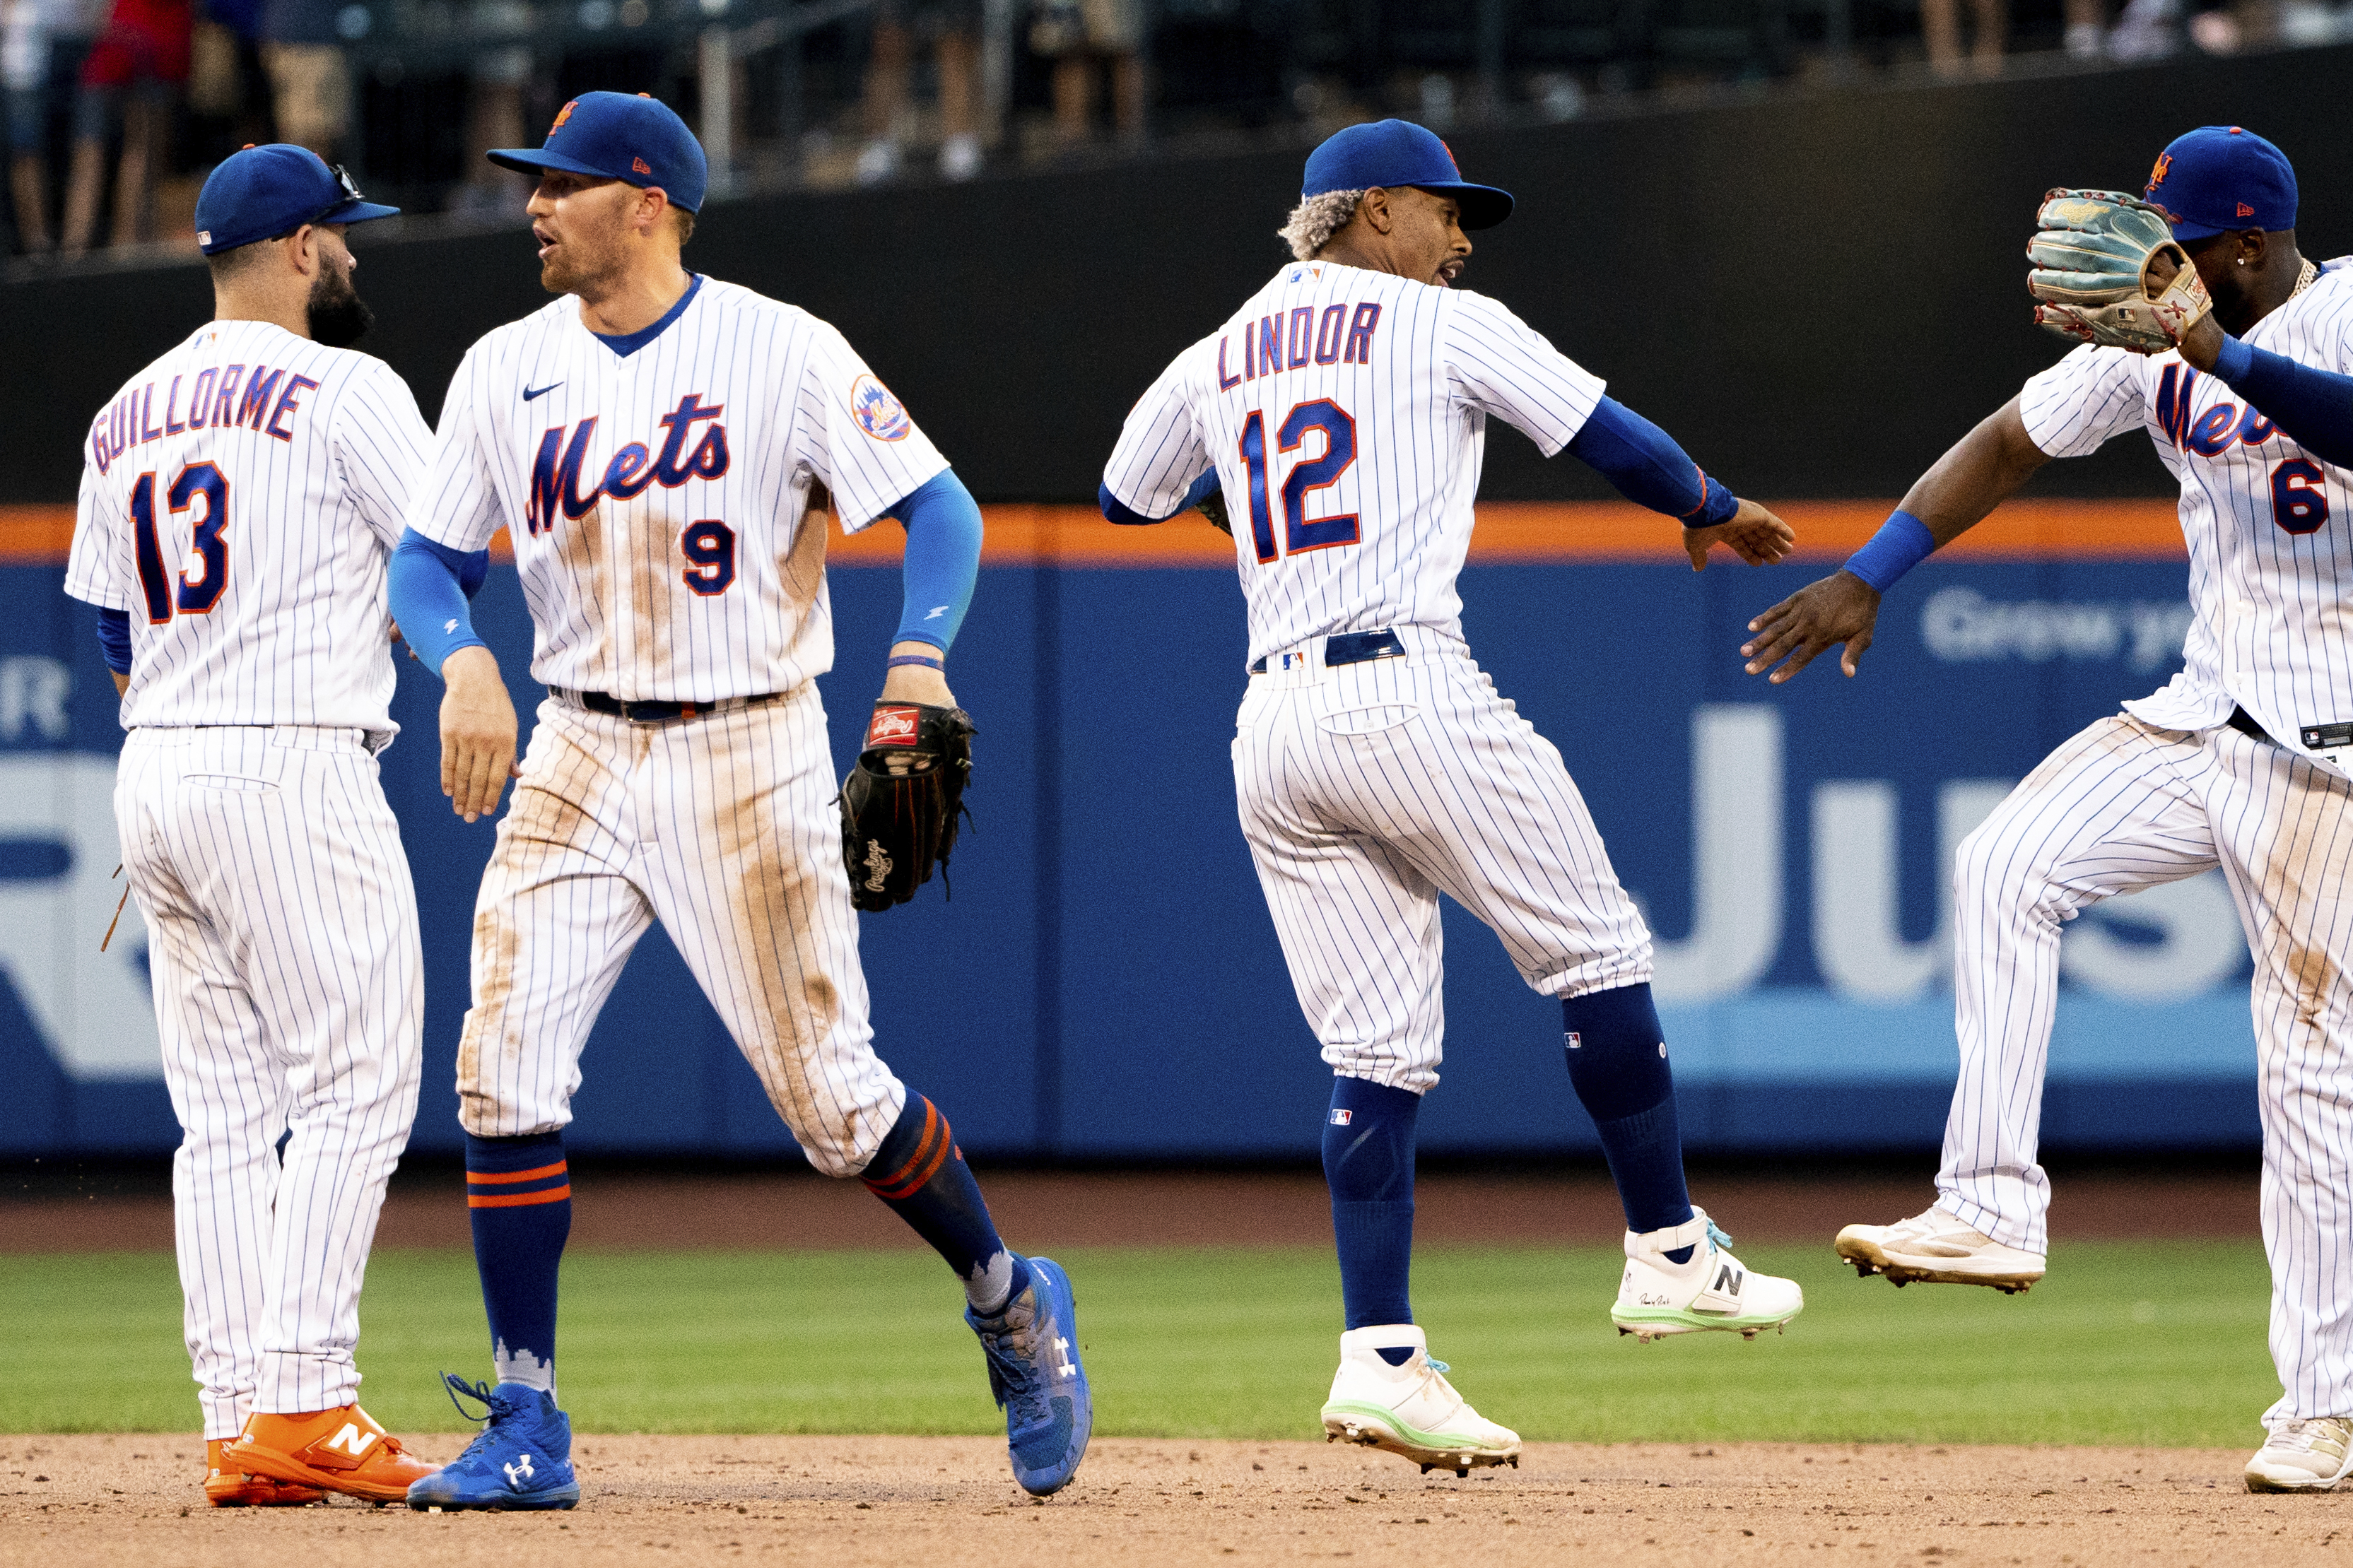 Dominant deGrom pitches surging Mets to 5-2 win over Braves - Now